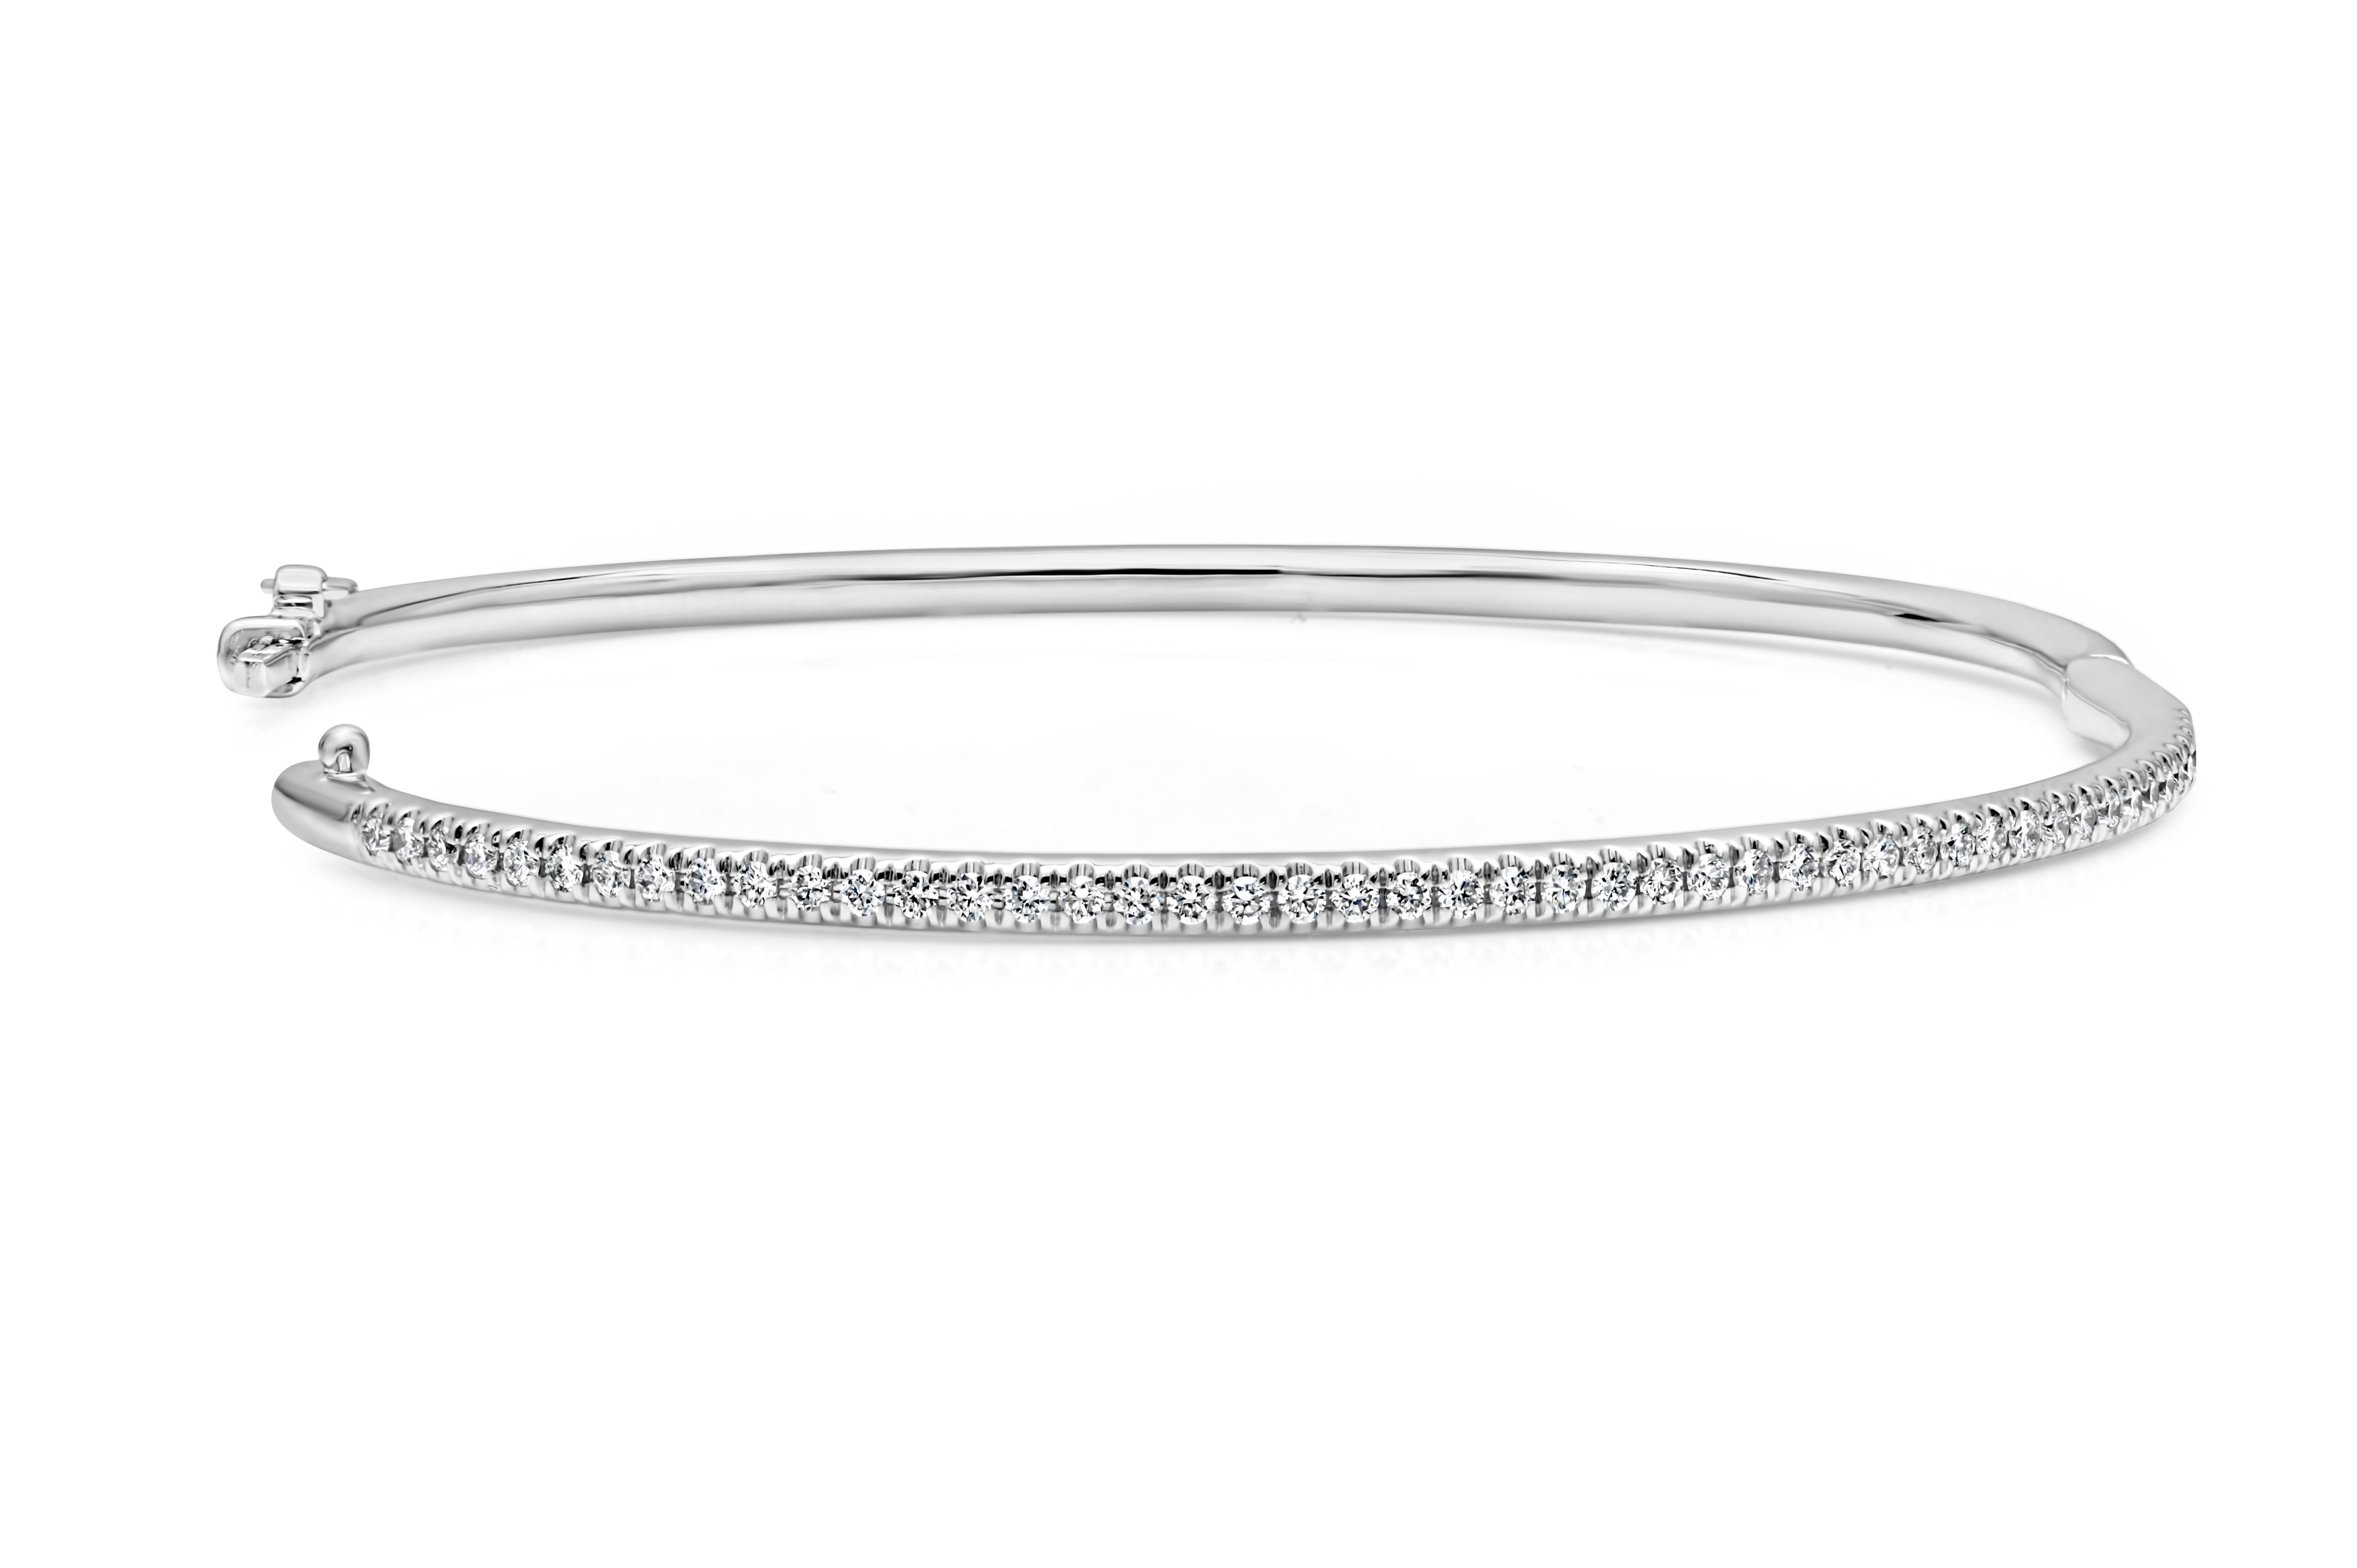 Showcasing a simple but elegant small wrist bangle bracelet set with 47 brilliant round cut diamonds weighing 0.50 carats total, F color and VS in clarity. Has a clasp to slip and wear the bangle securely. Finely made in 14K White Gold and 6.5